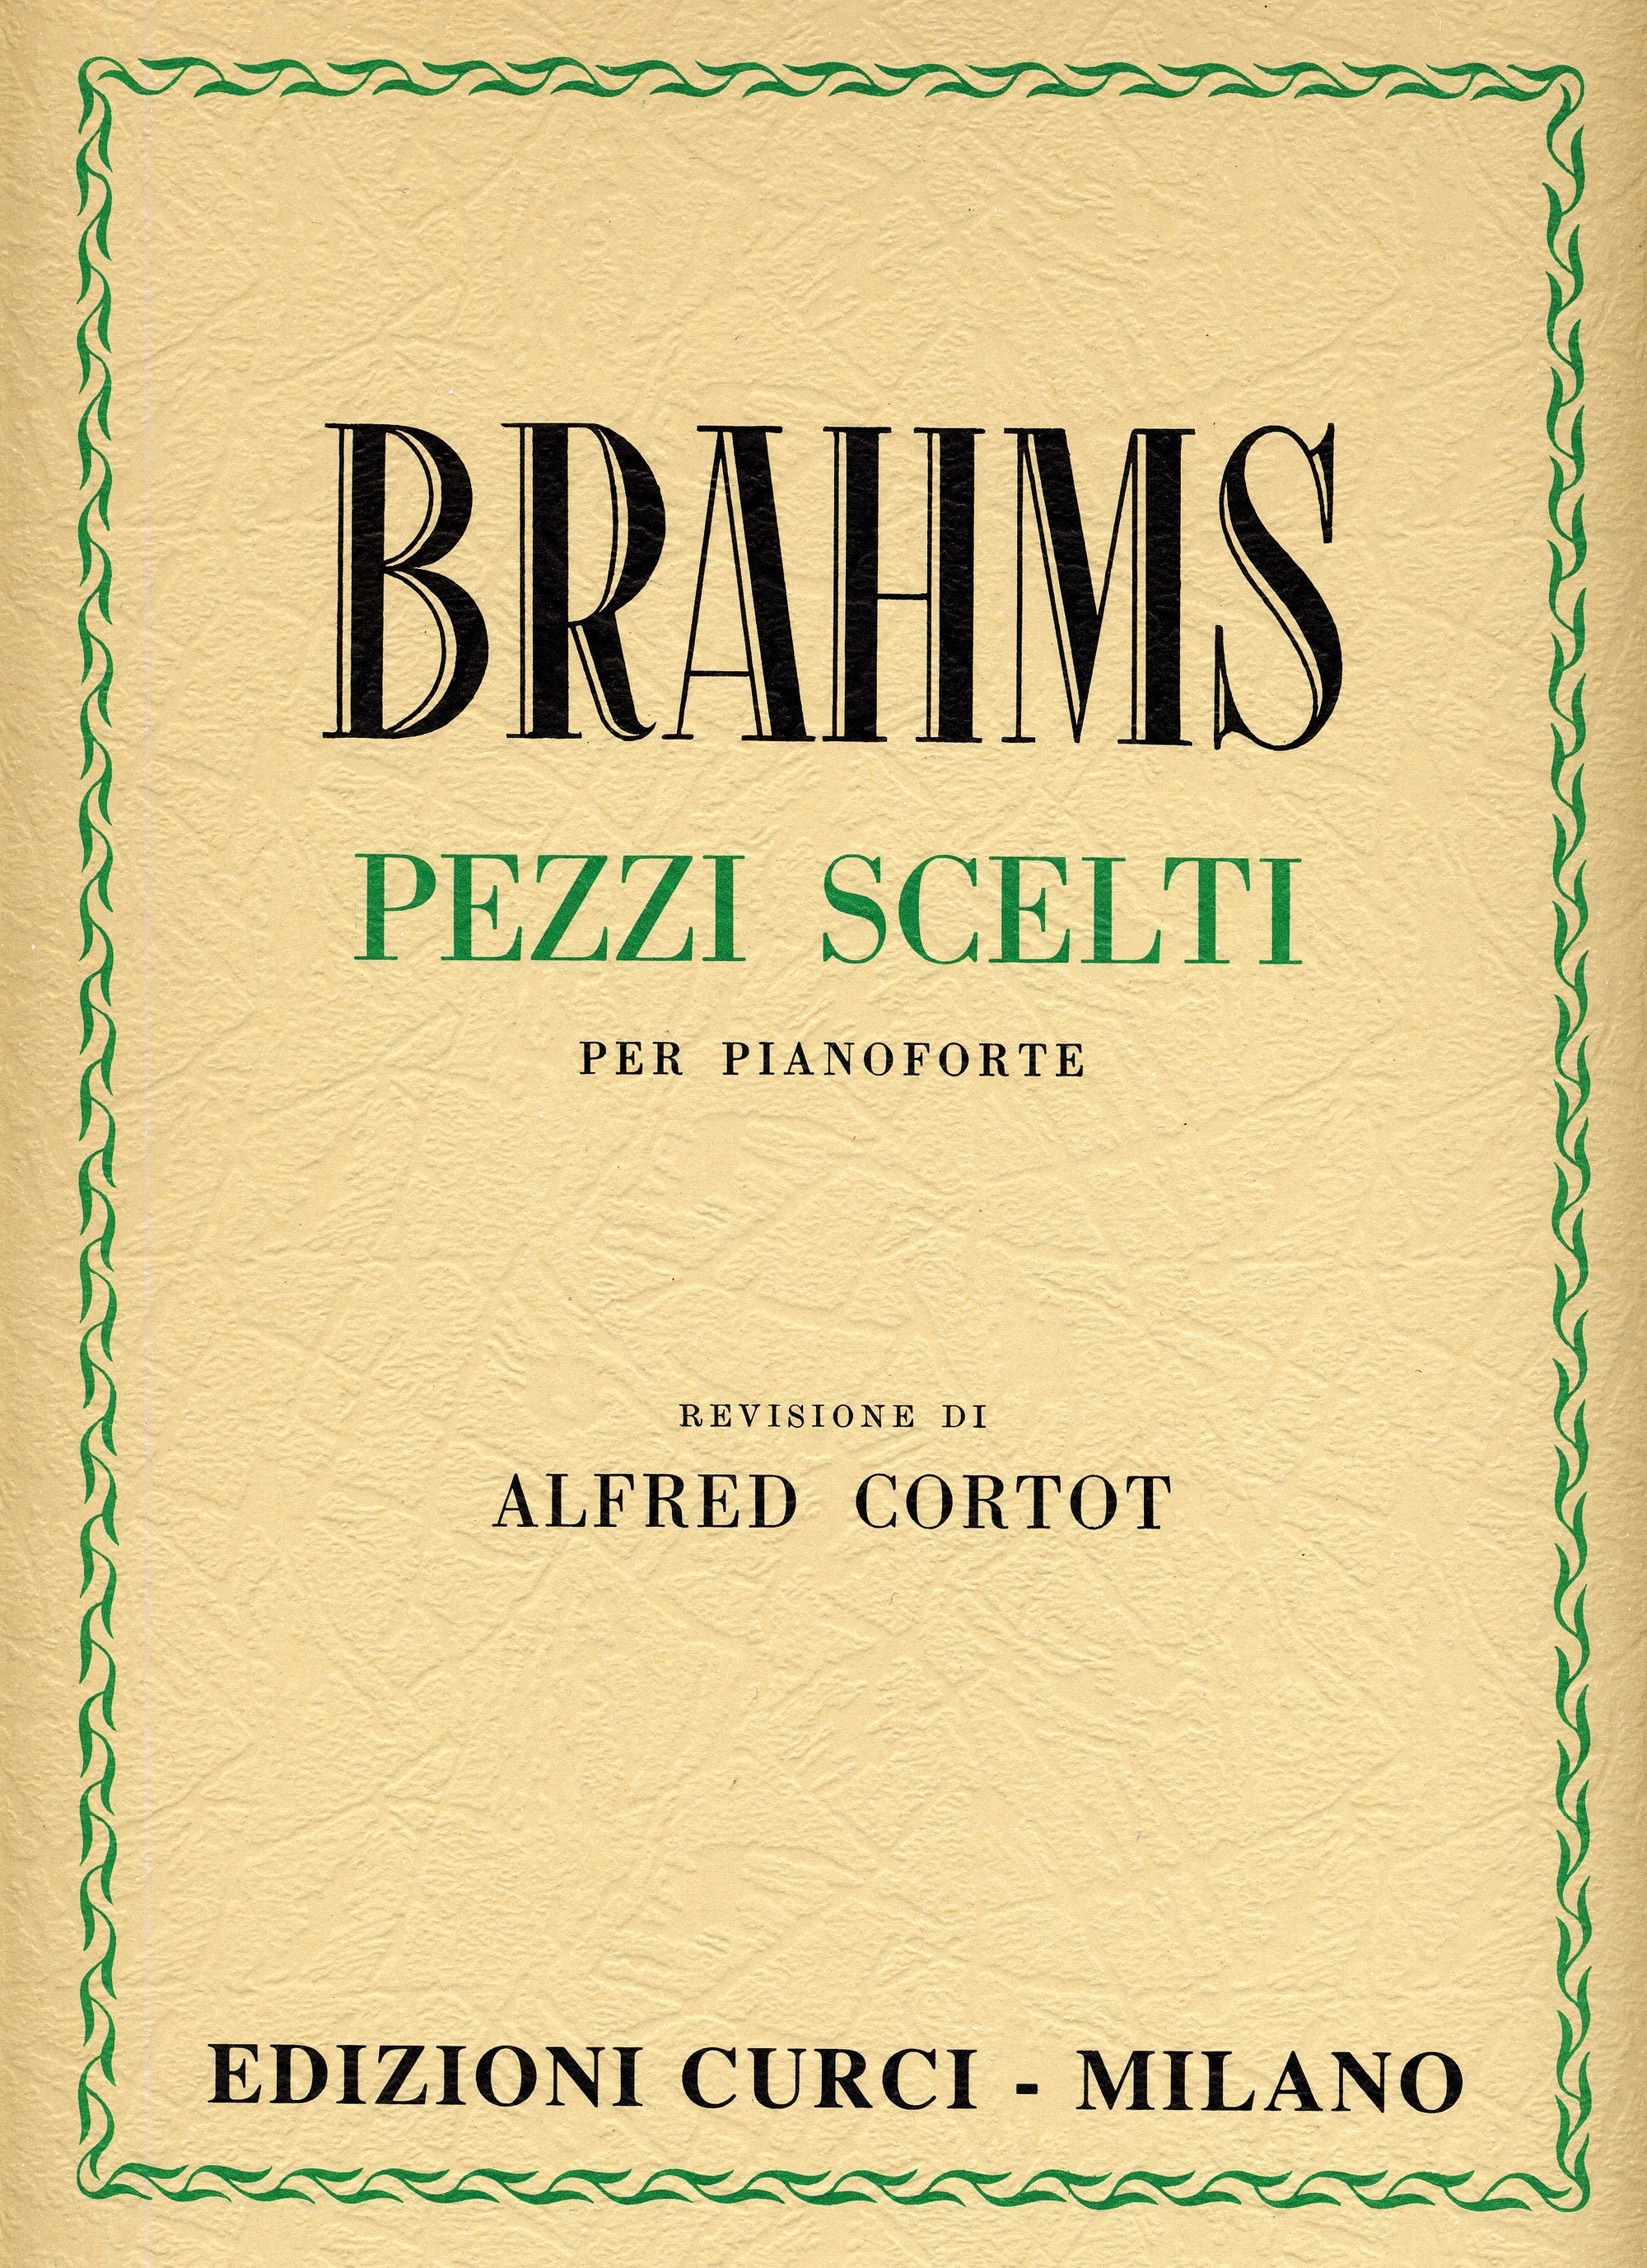 Brahms: Selected Piano Pieces